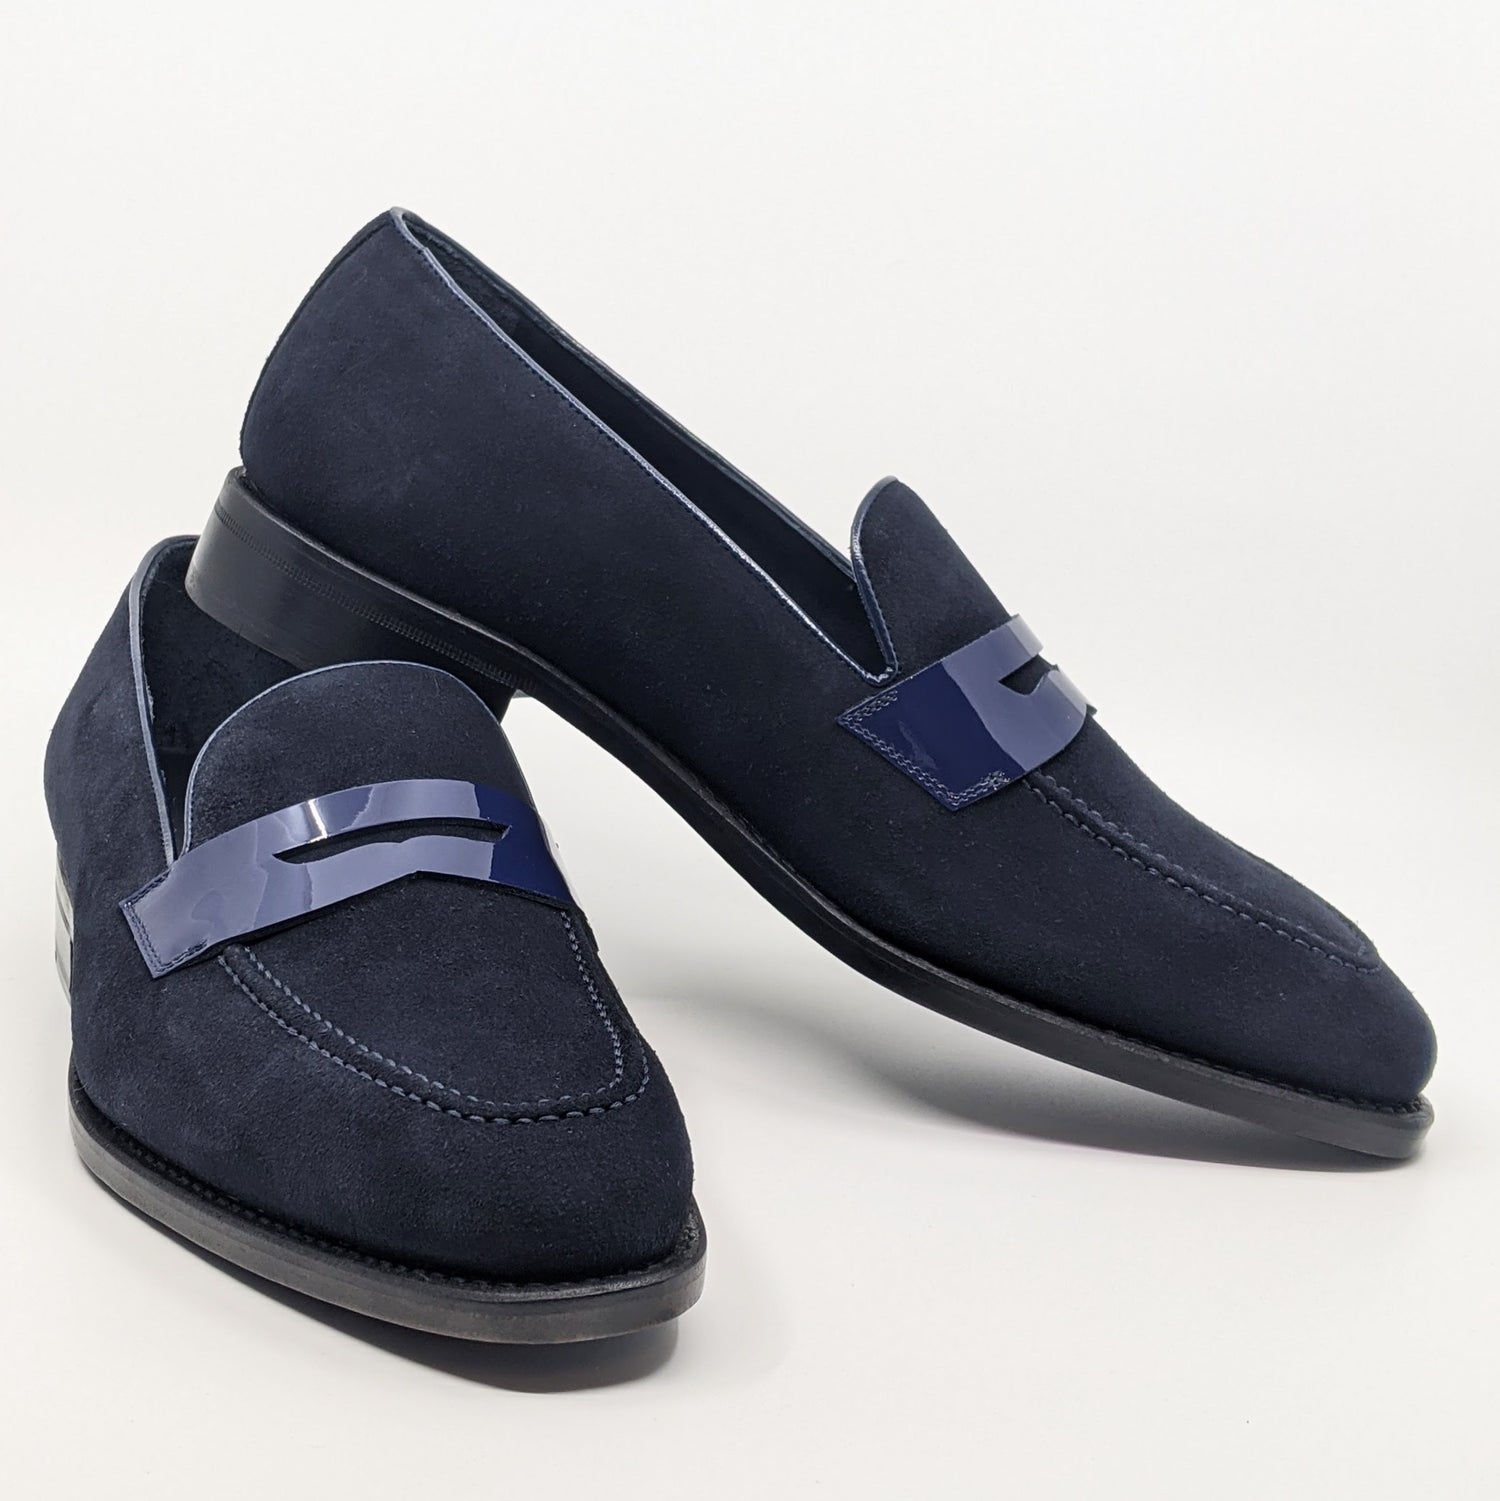 suitor blue shoes in with Designed with elegance from heel to toe